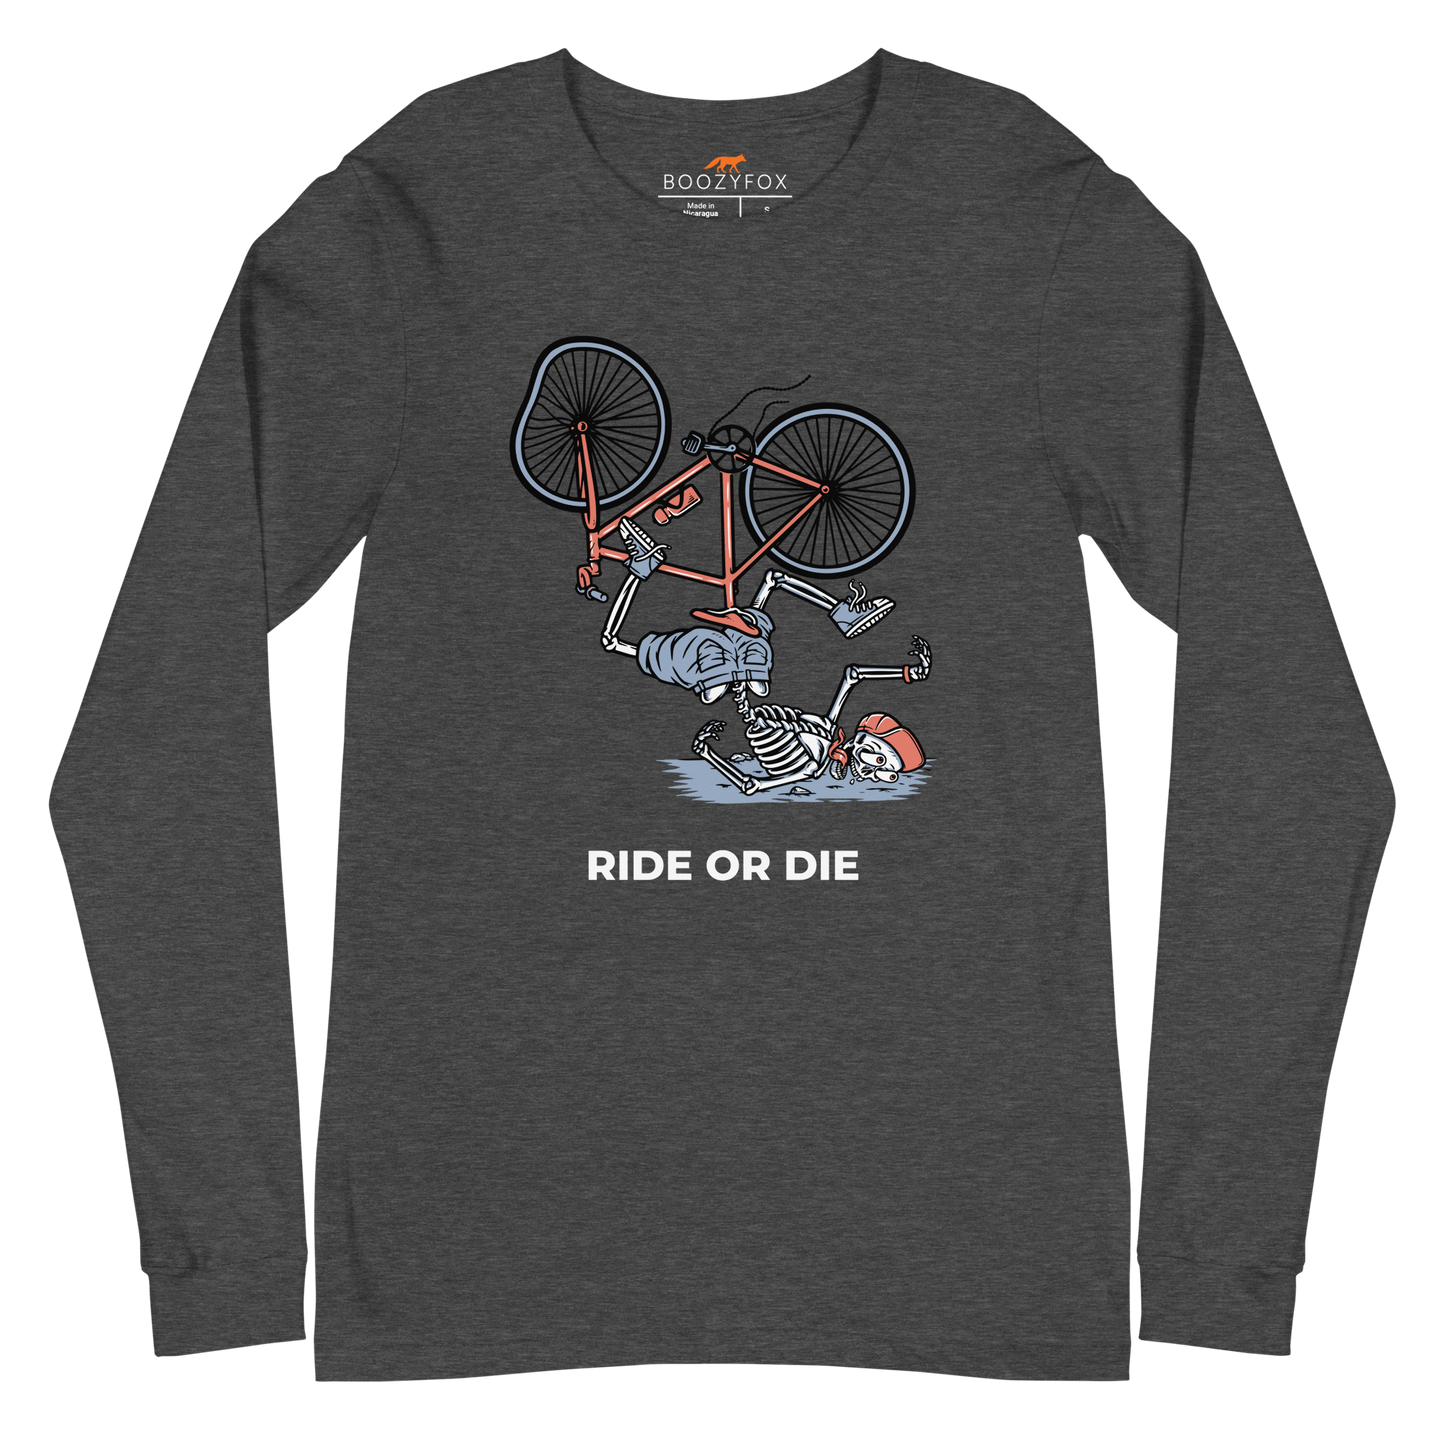 Dark Grey Heather Ride or Die Long Sleeve Tee featuring a bold Skeleton Falling While Riding a Bicycle graphic on the chest - Funny Skeleton Long Sleeve Graphic Tees - Boozy Fox